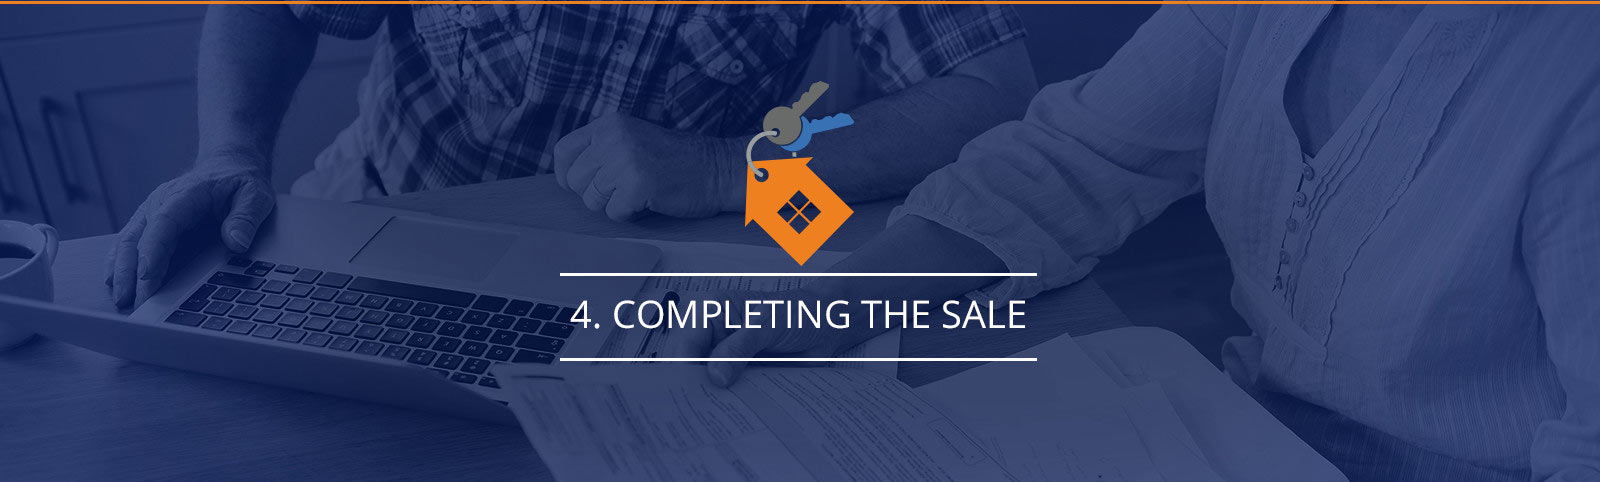 Completing the sale